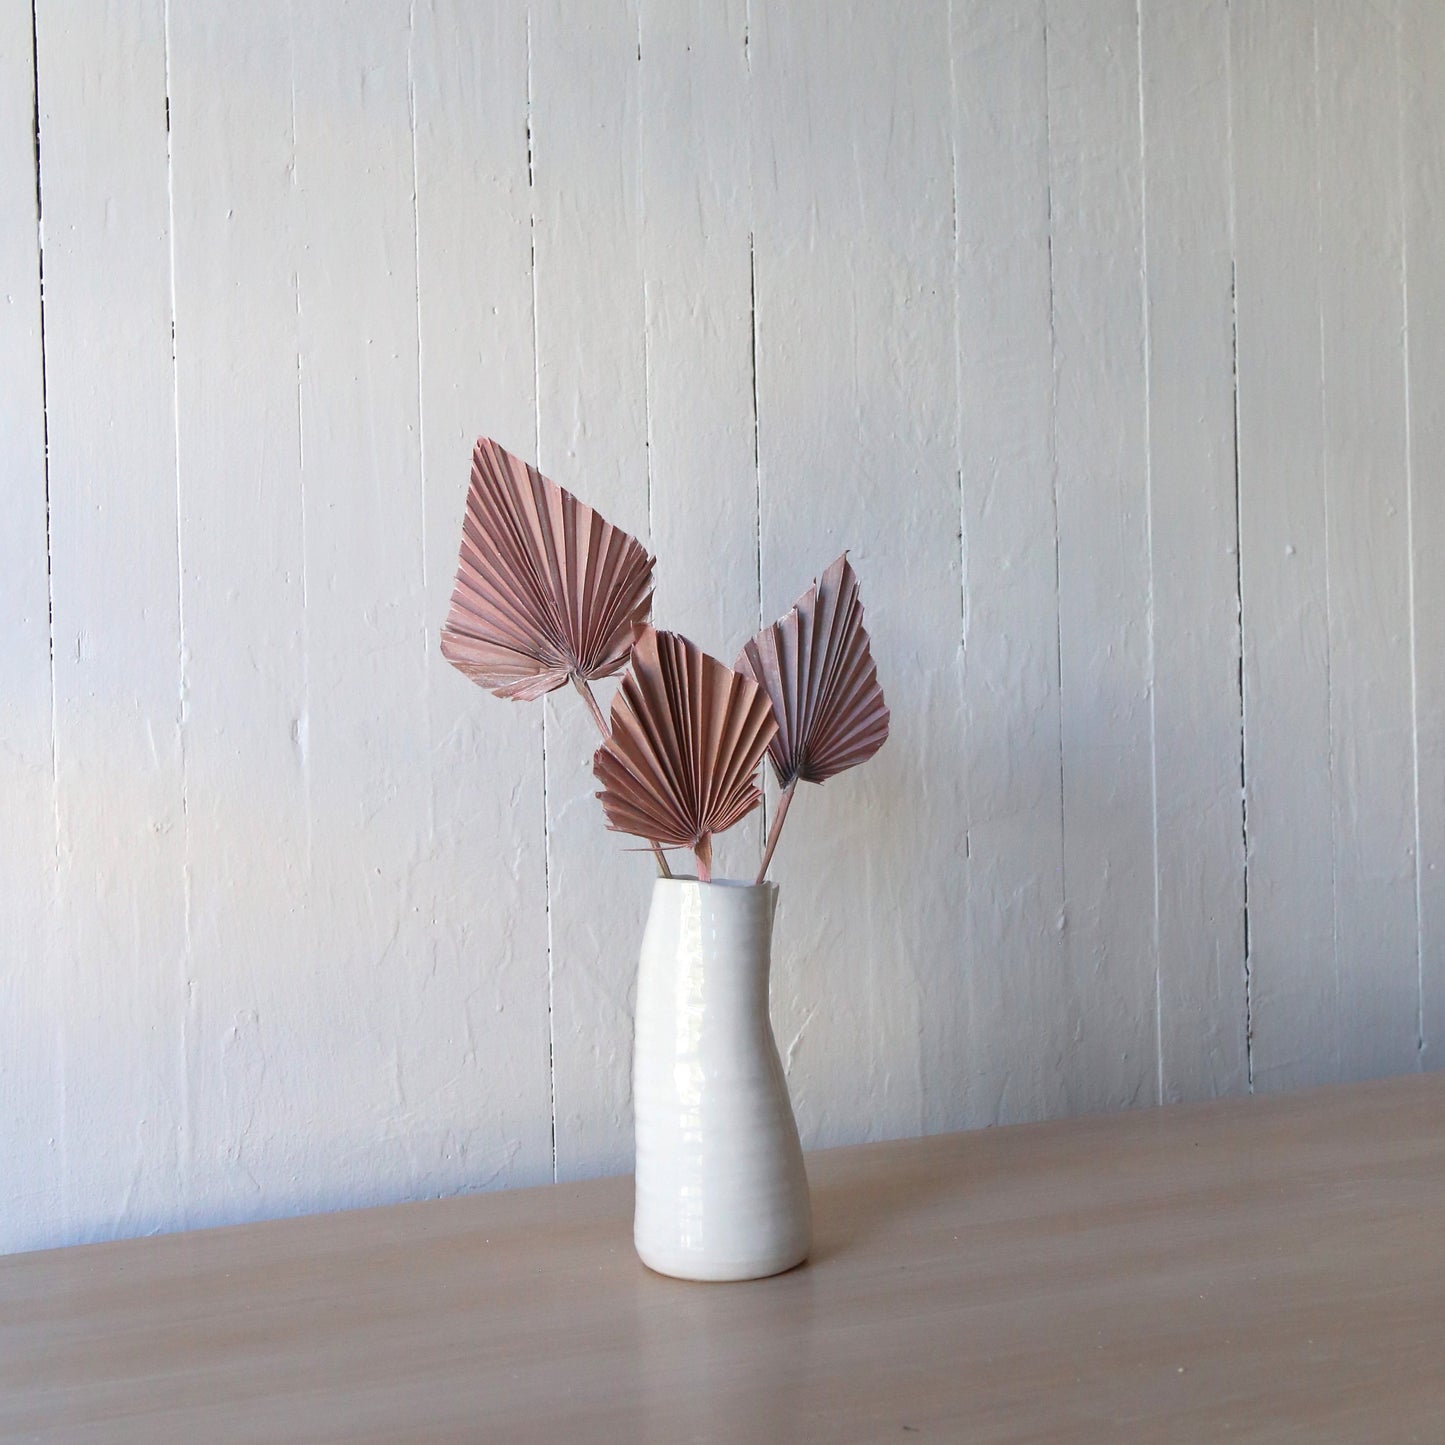 Lilac spear palms available at Rook & Rose.